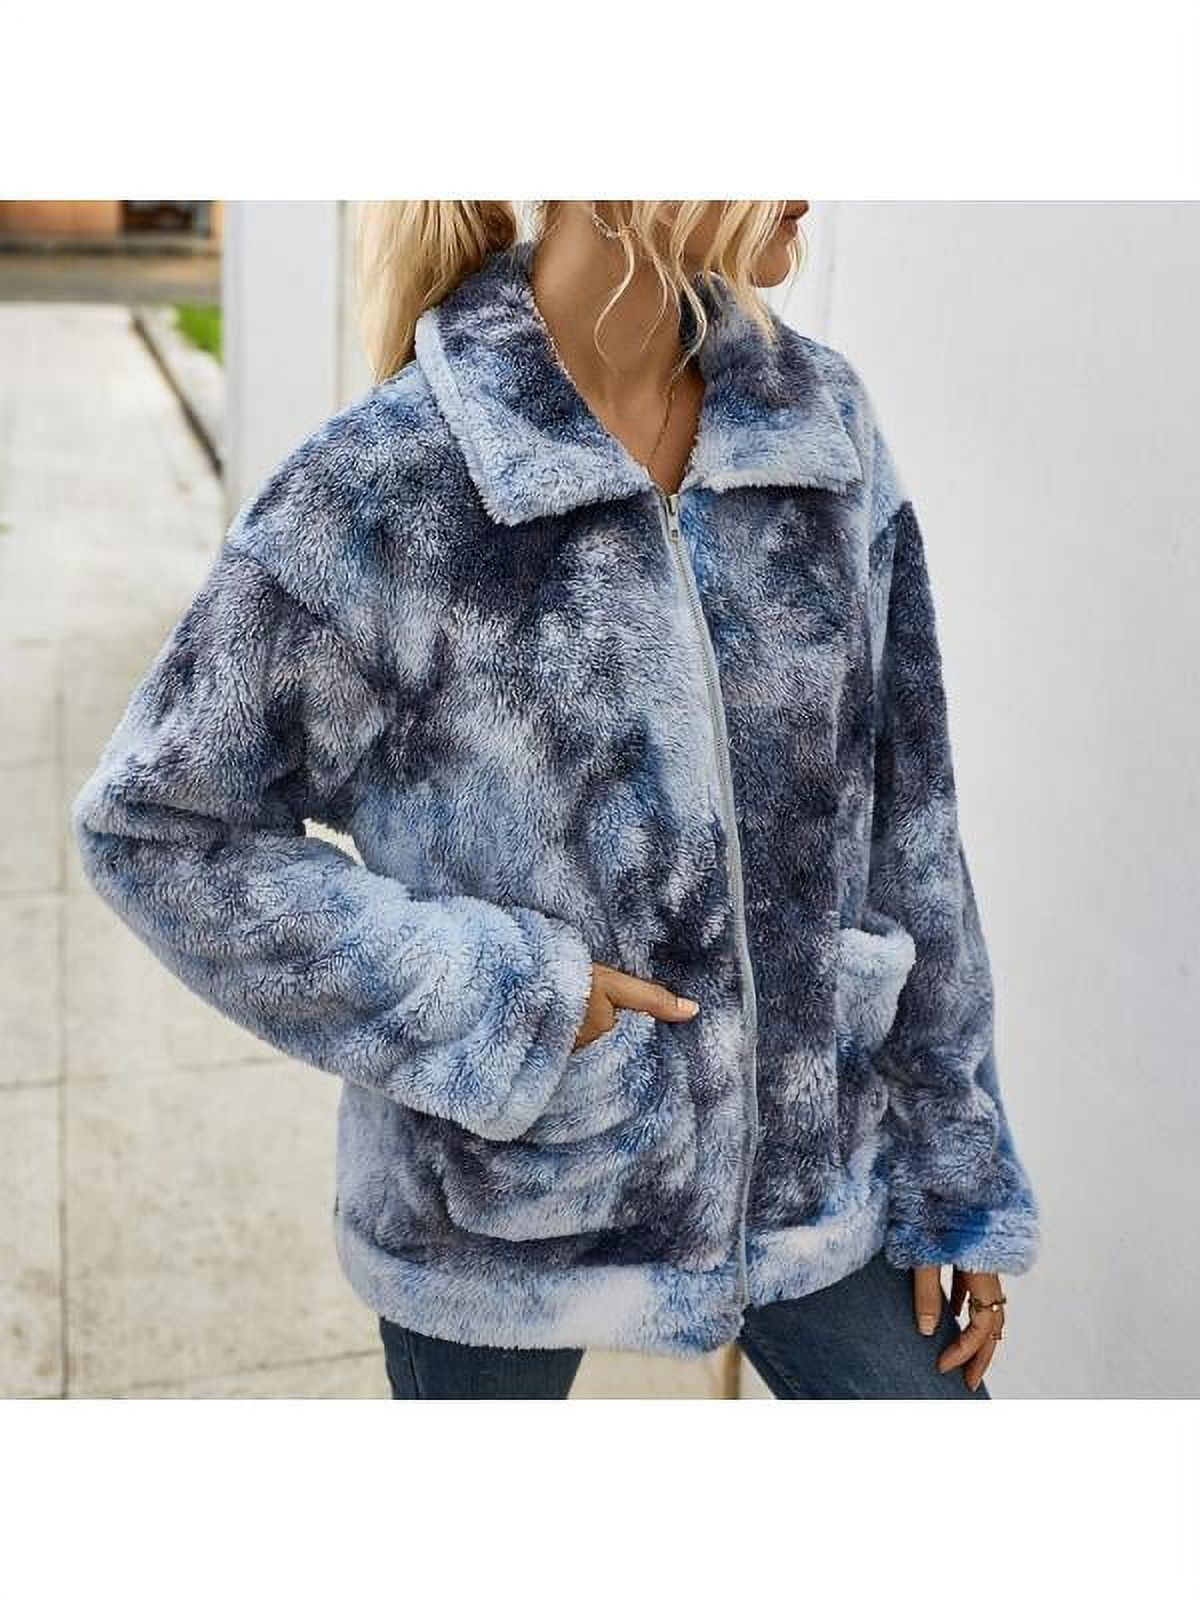 Luxsea Women Autumn Casual Ladies Fashion Tie Dye Jacket With Pocket Daily Coats - image 2 of 7